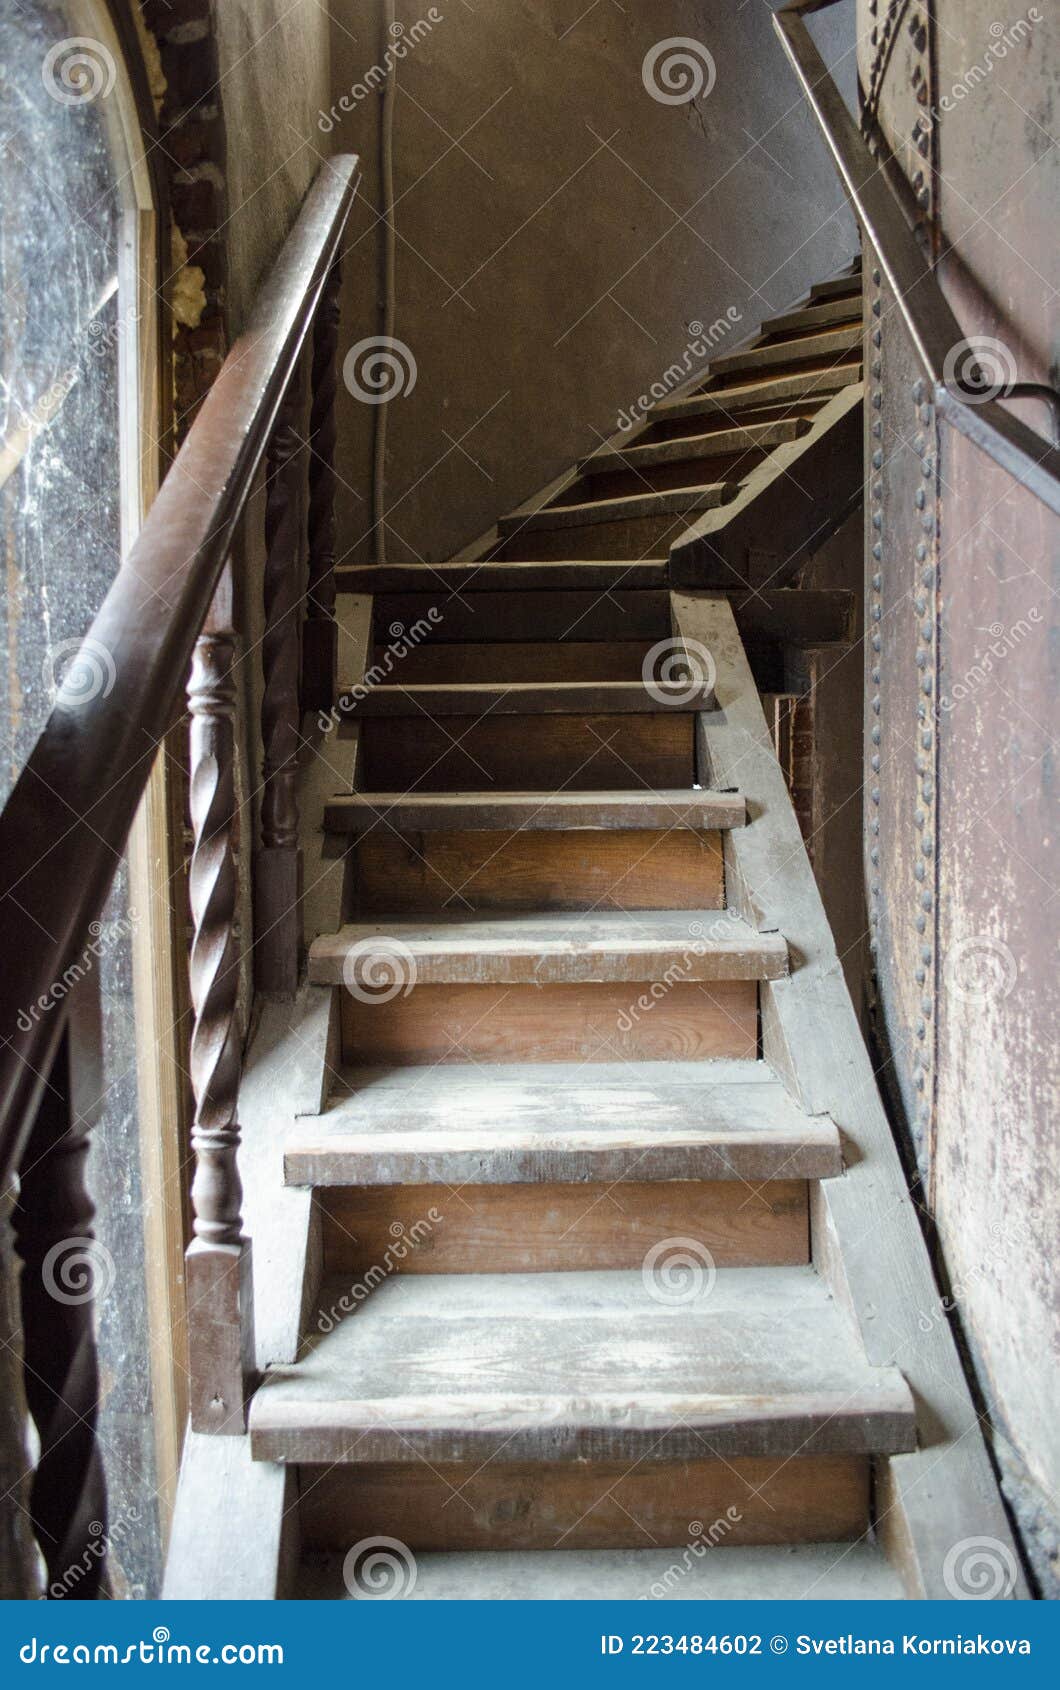 The Old Narrow Wooden Staircase Stock Photo - Image of abstract ...